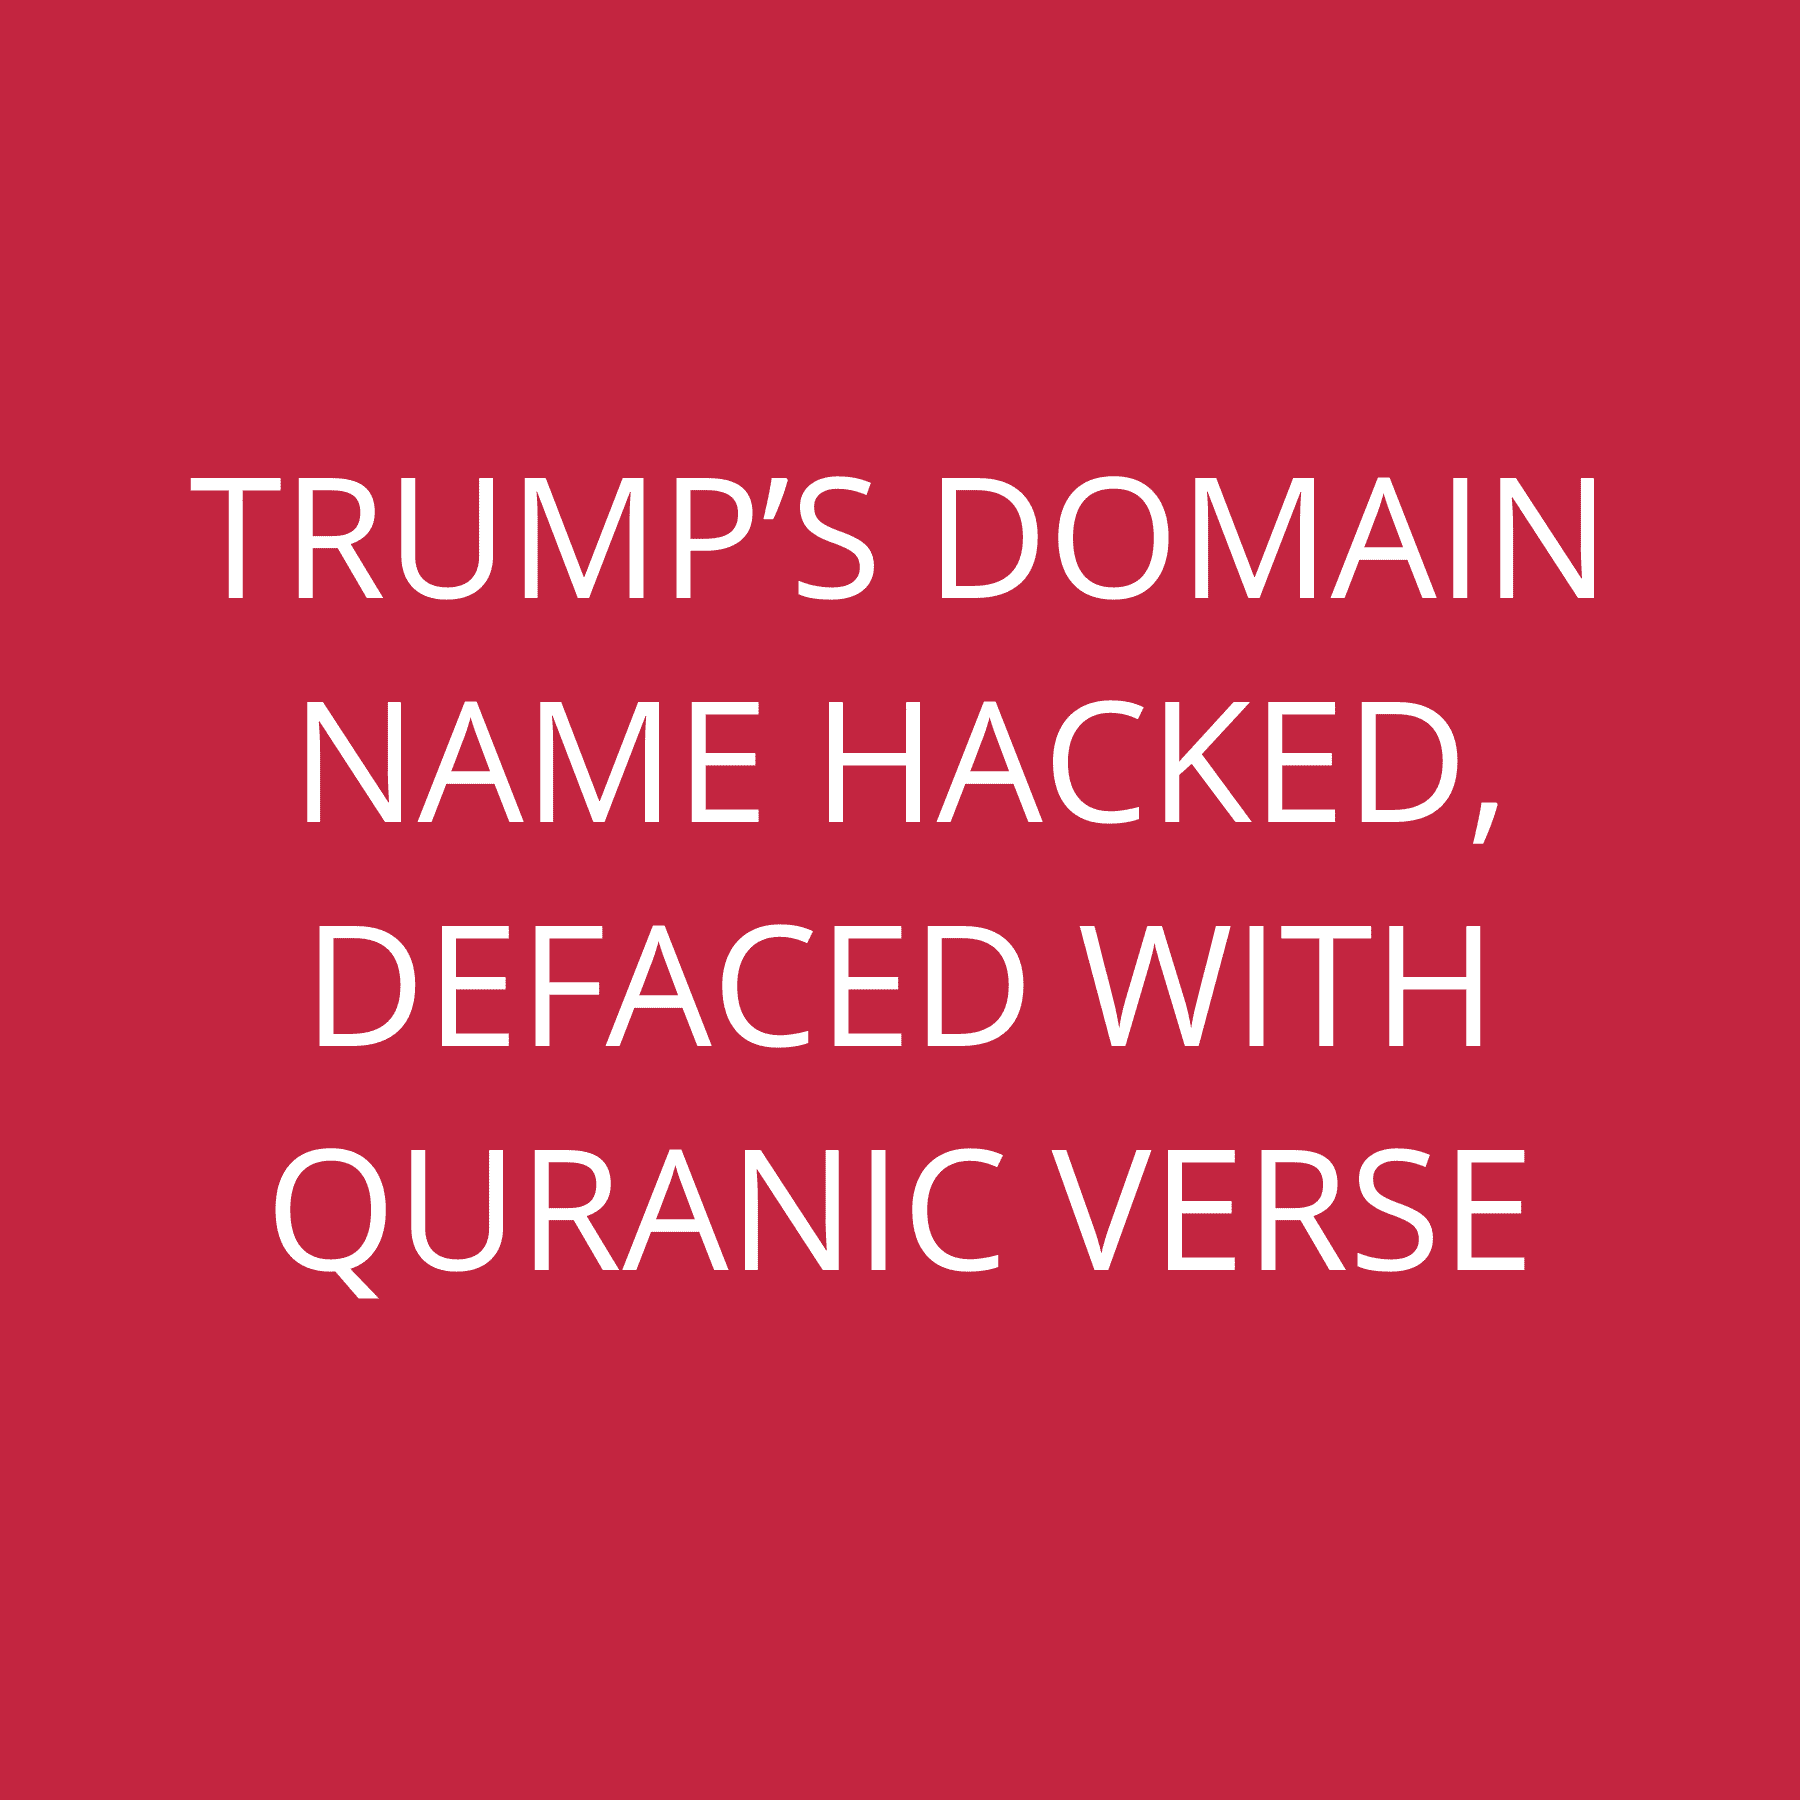 Trump’s domain name hacked, defaced with Quranic verse